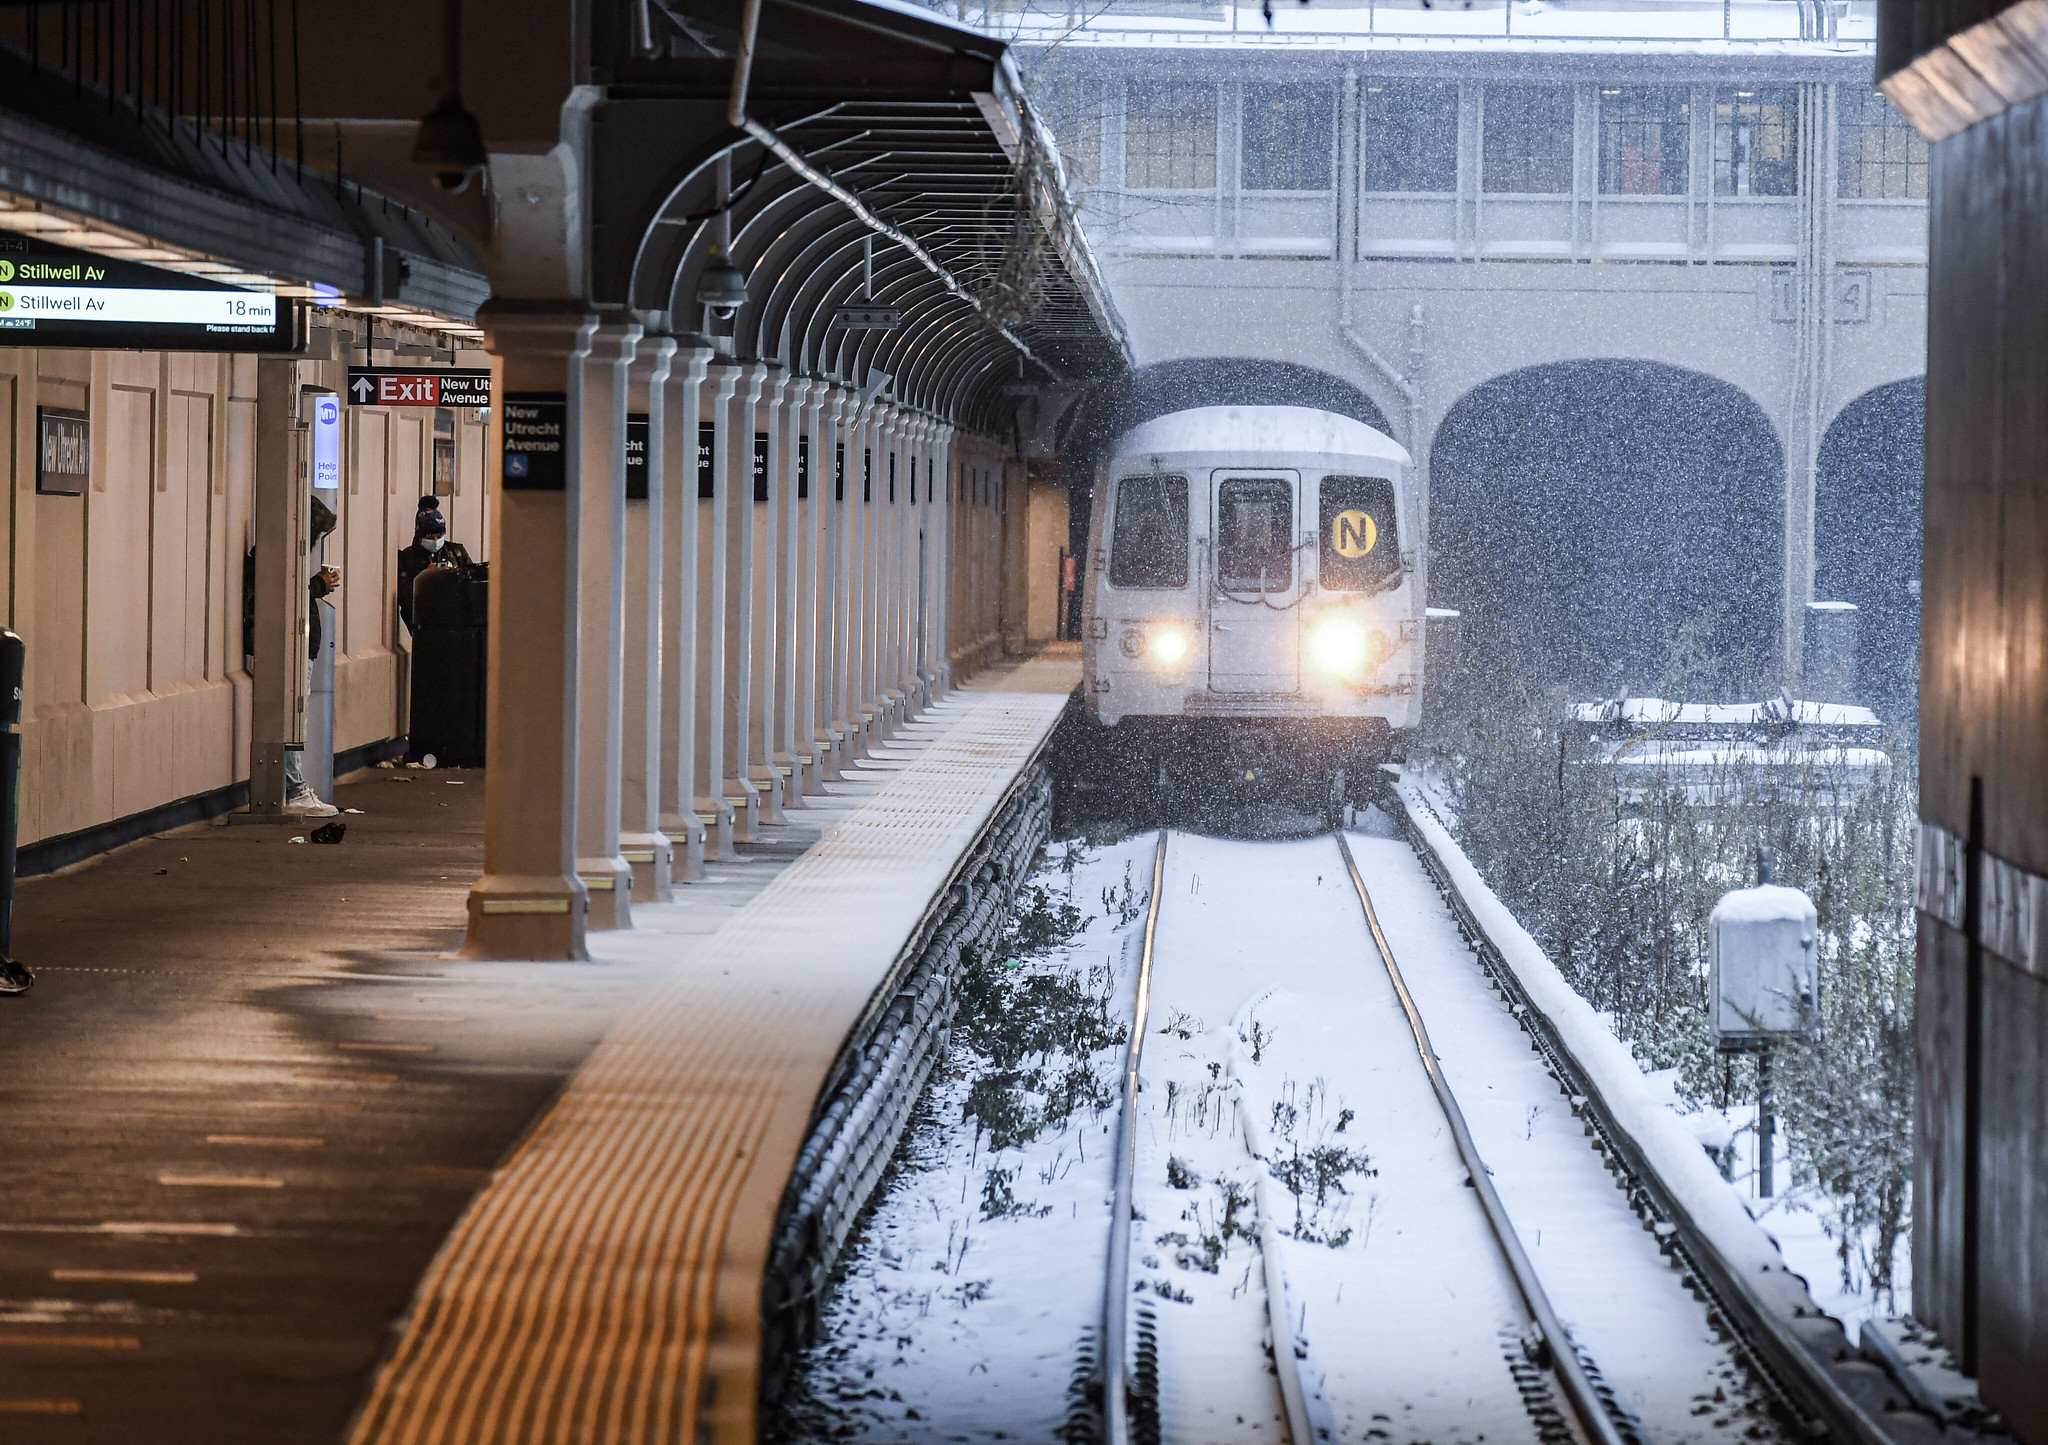 N train pulling into New Utrecht Avenue station during winter storm